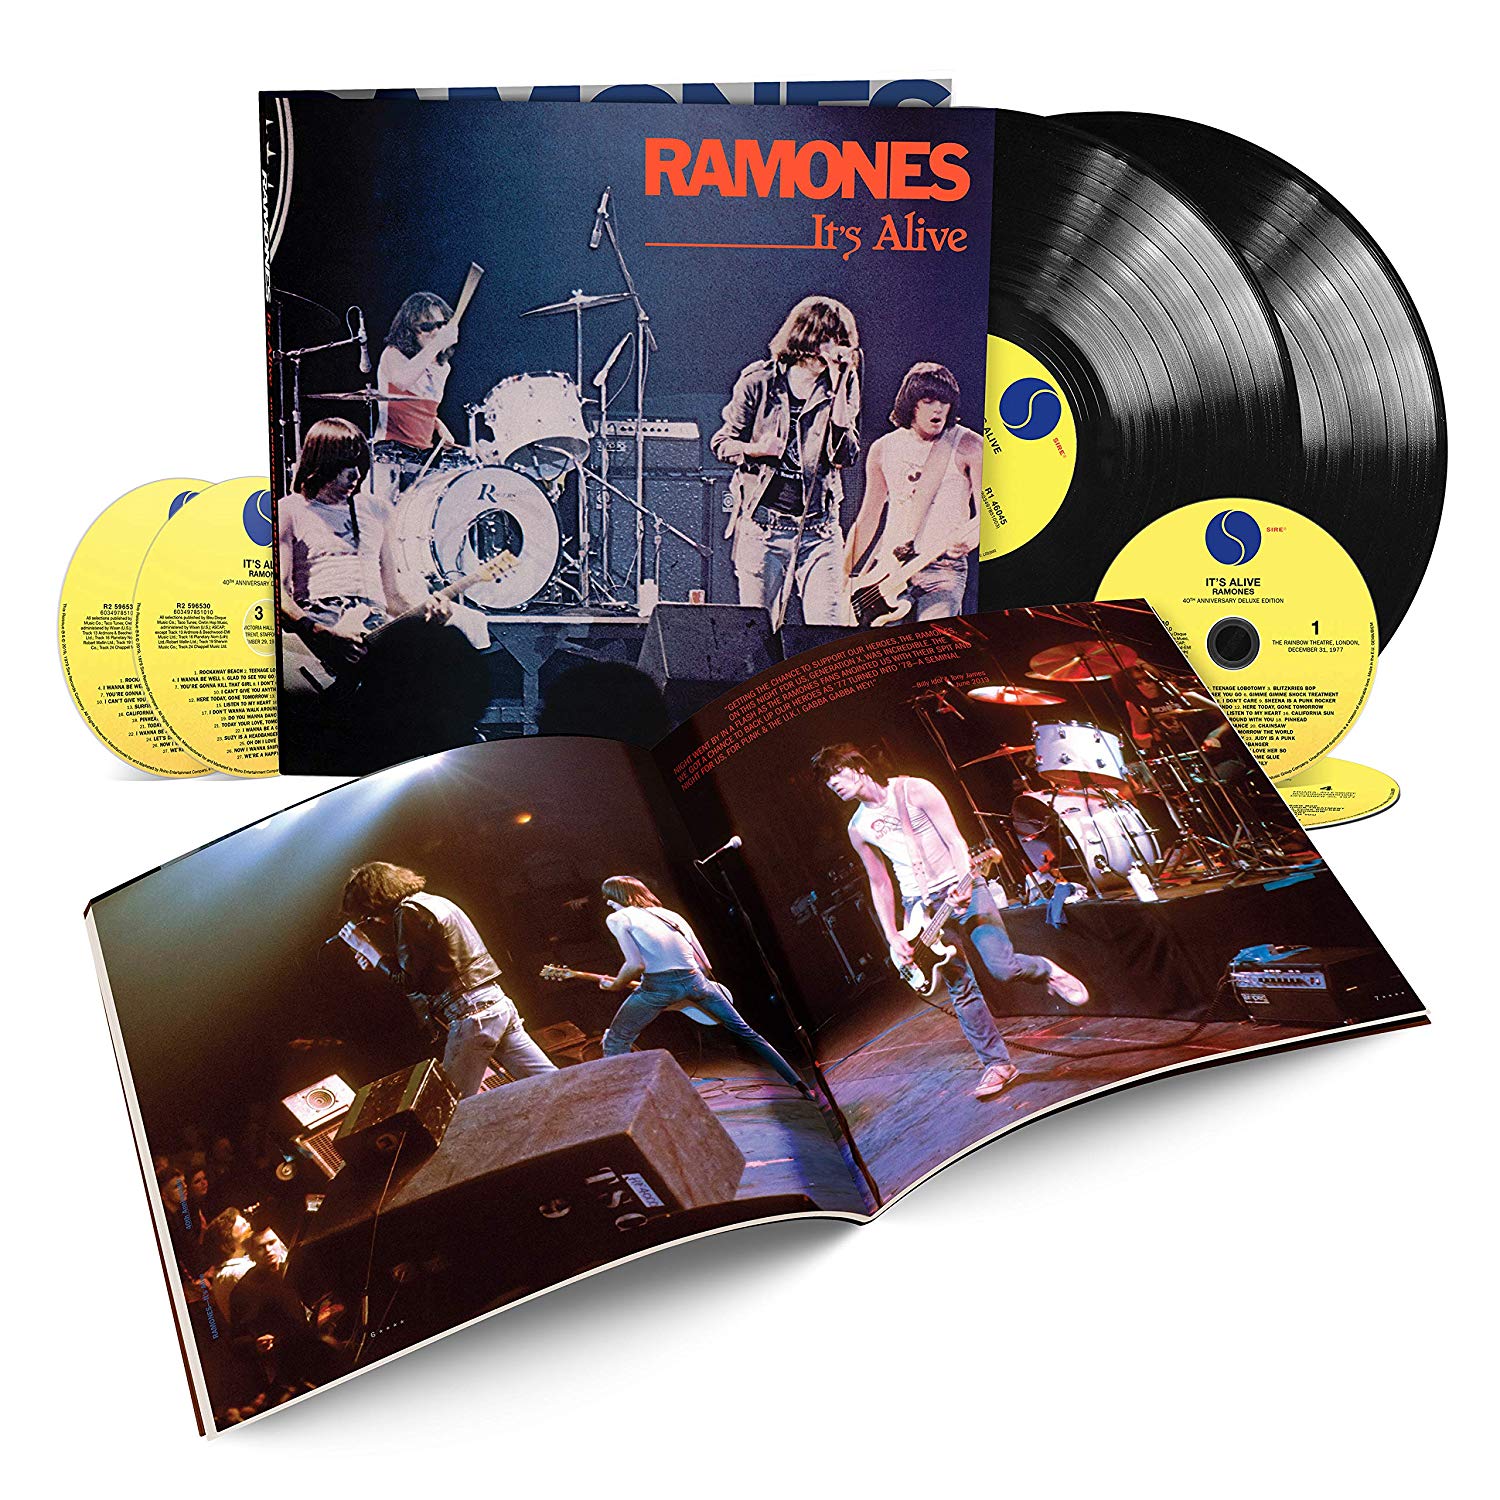 It's Alive by the Ramones